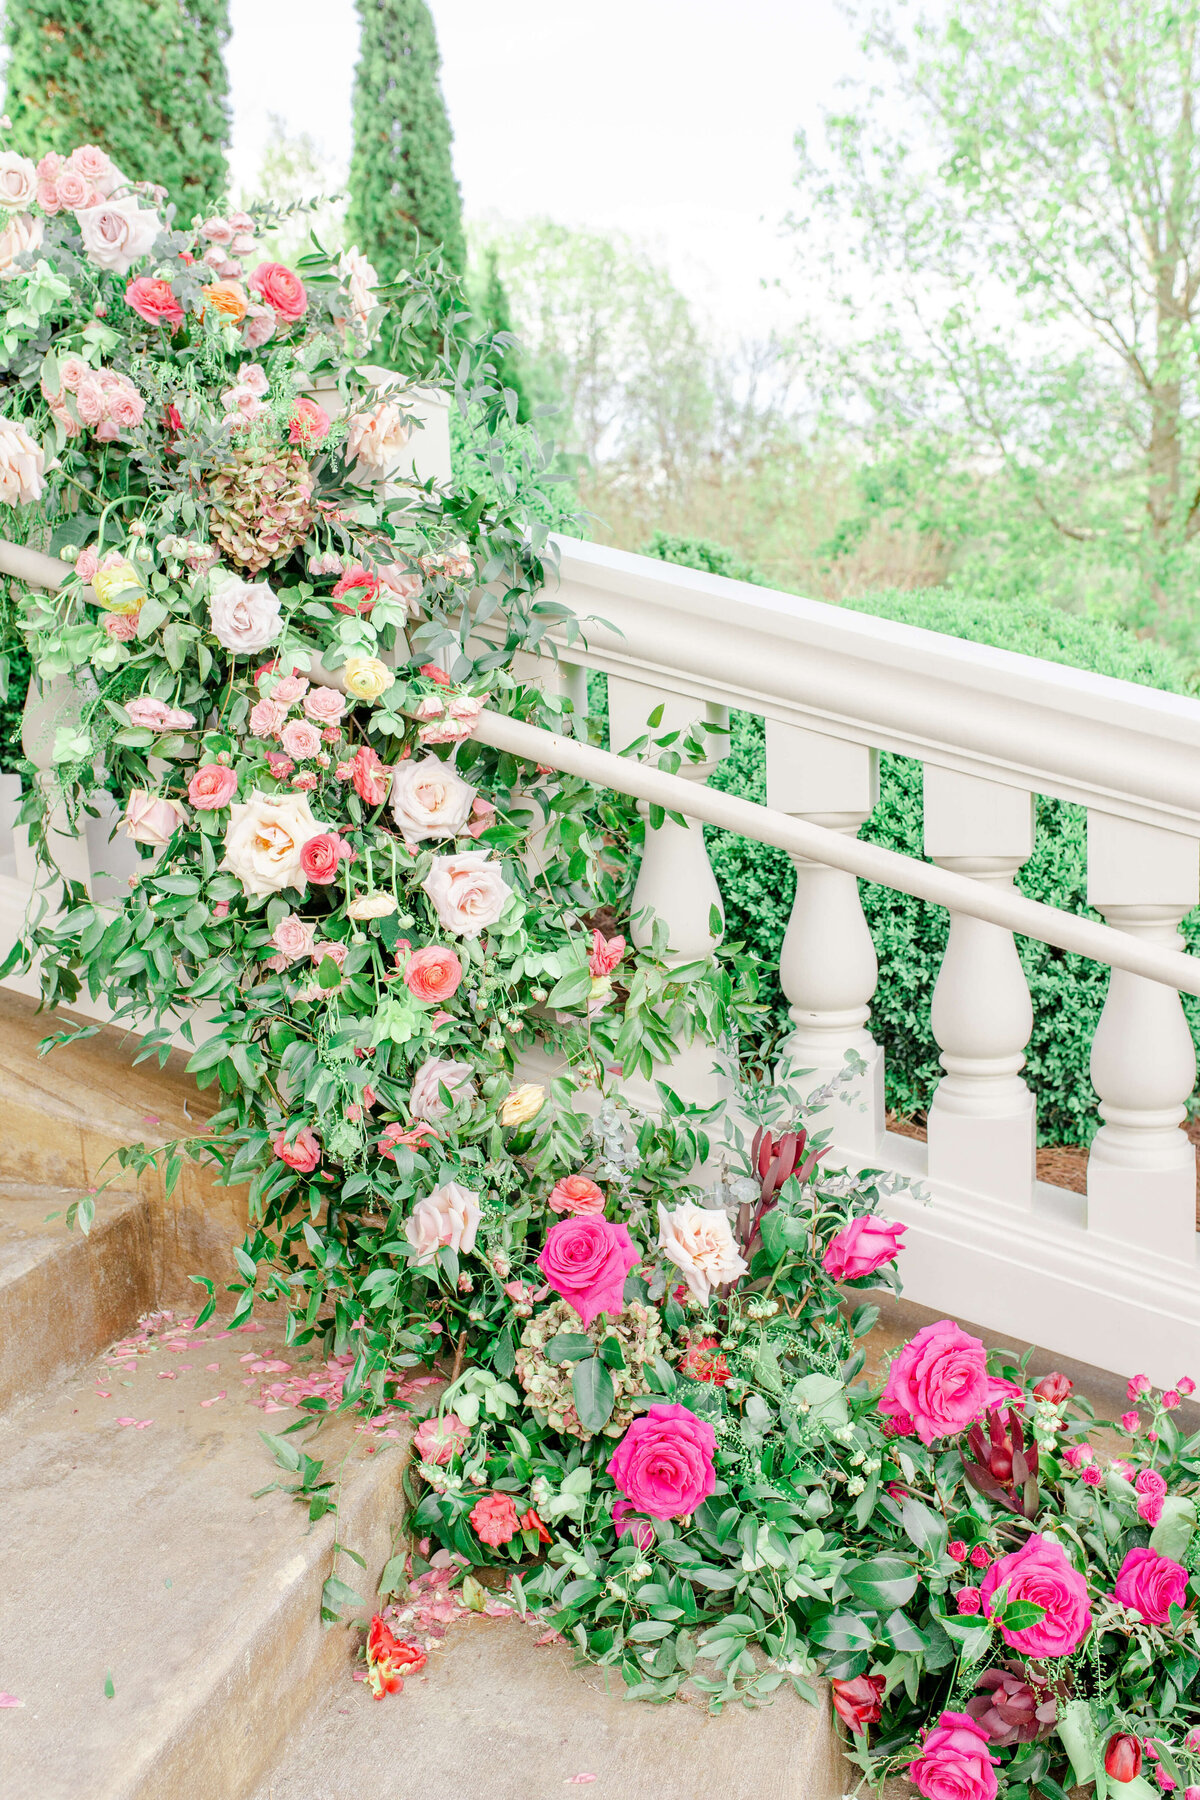 Wedding-Flowers-trailing-down-stairs-railing-Bethany-Lane-Photography